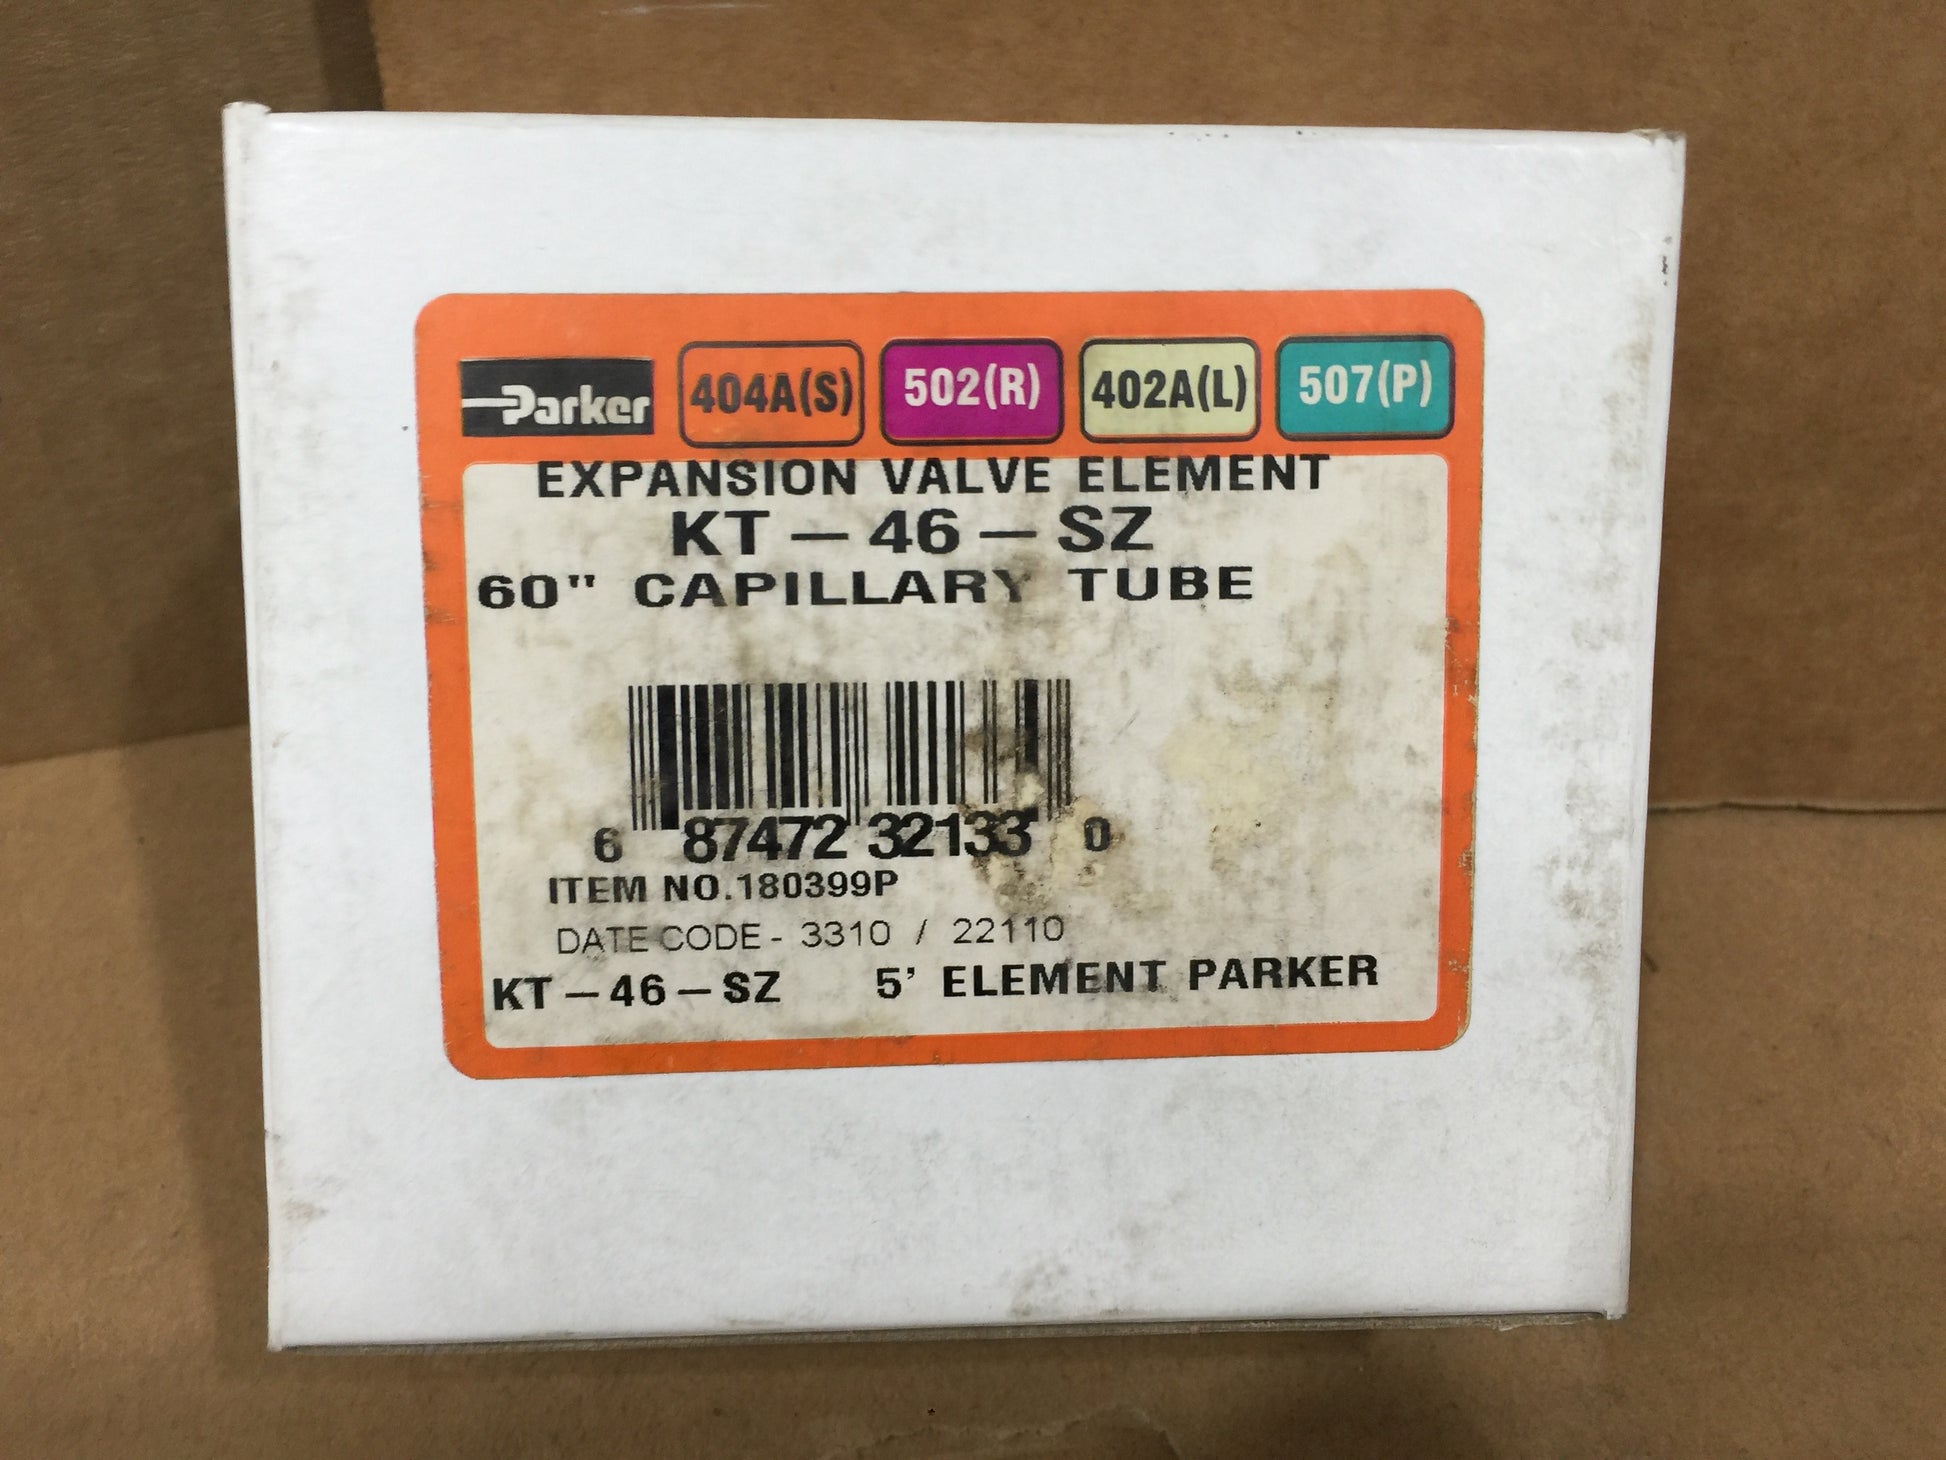 EXPANSION VALVE HEAD POWER ELEMENT; USE WITH R-502,R404A,R402A AND R507